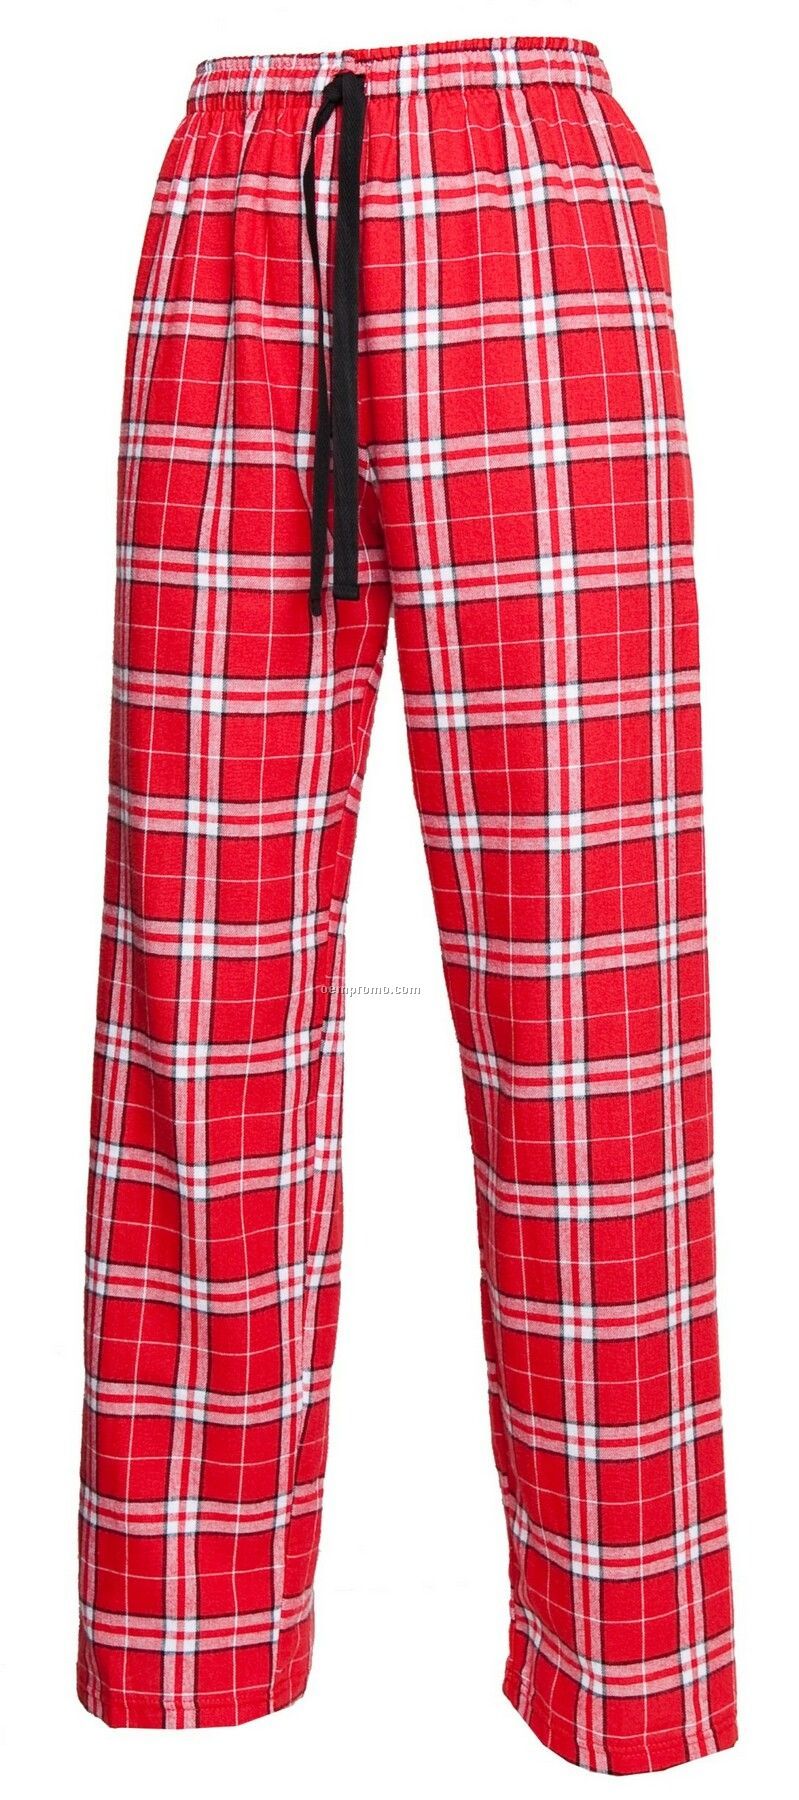 Youth Team Pride Flannel Pant In Red & White Plaid